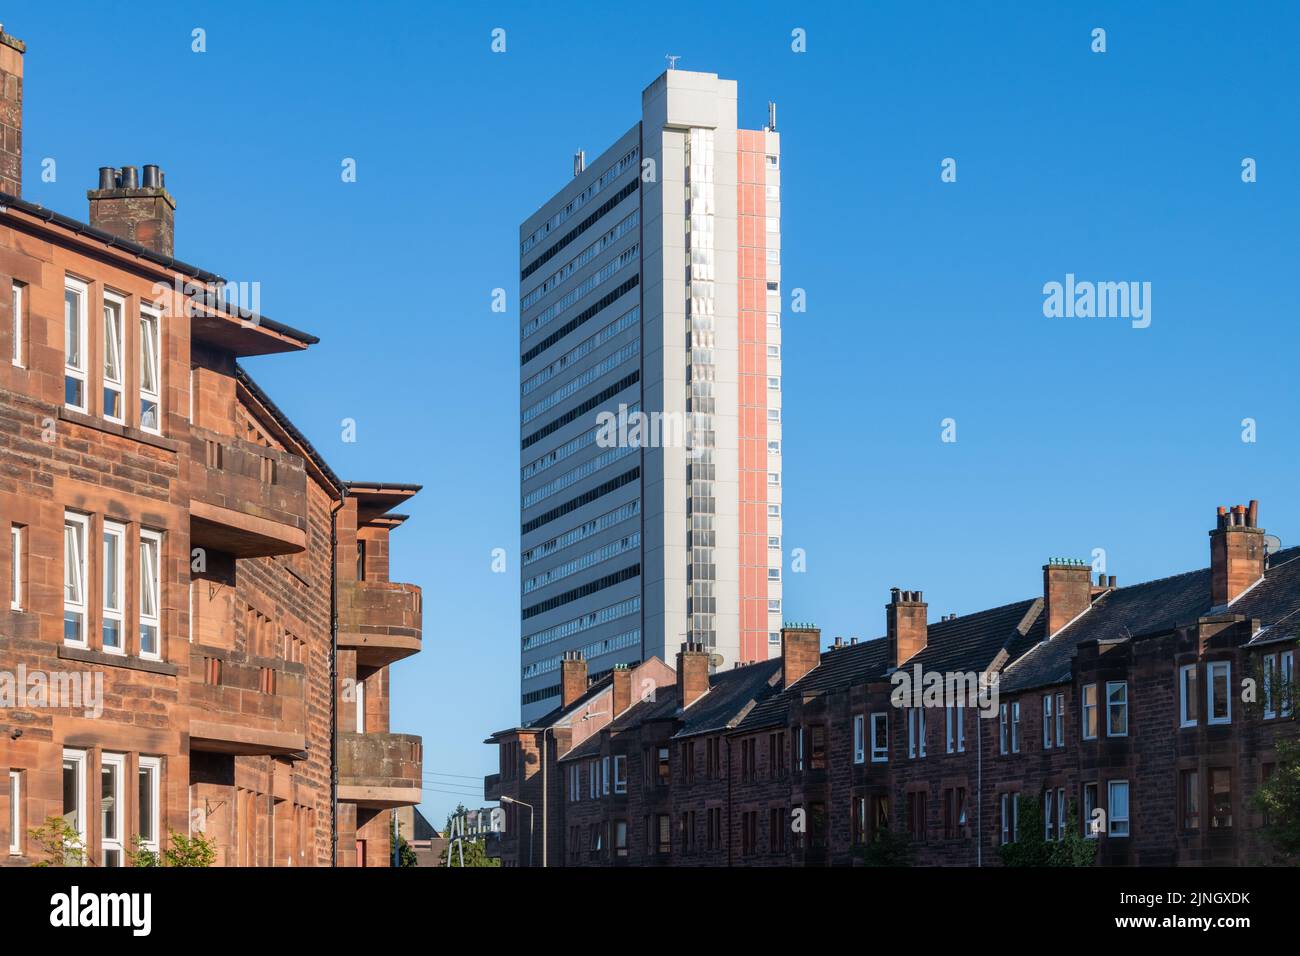 Anniesland Court - A listed brutalist residential tower block alongside traditional red sandstone tenement buildings, Anniesland, Glasgow, Scotland UK Stock Photo